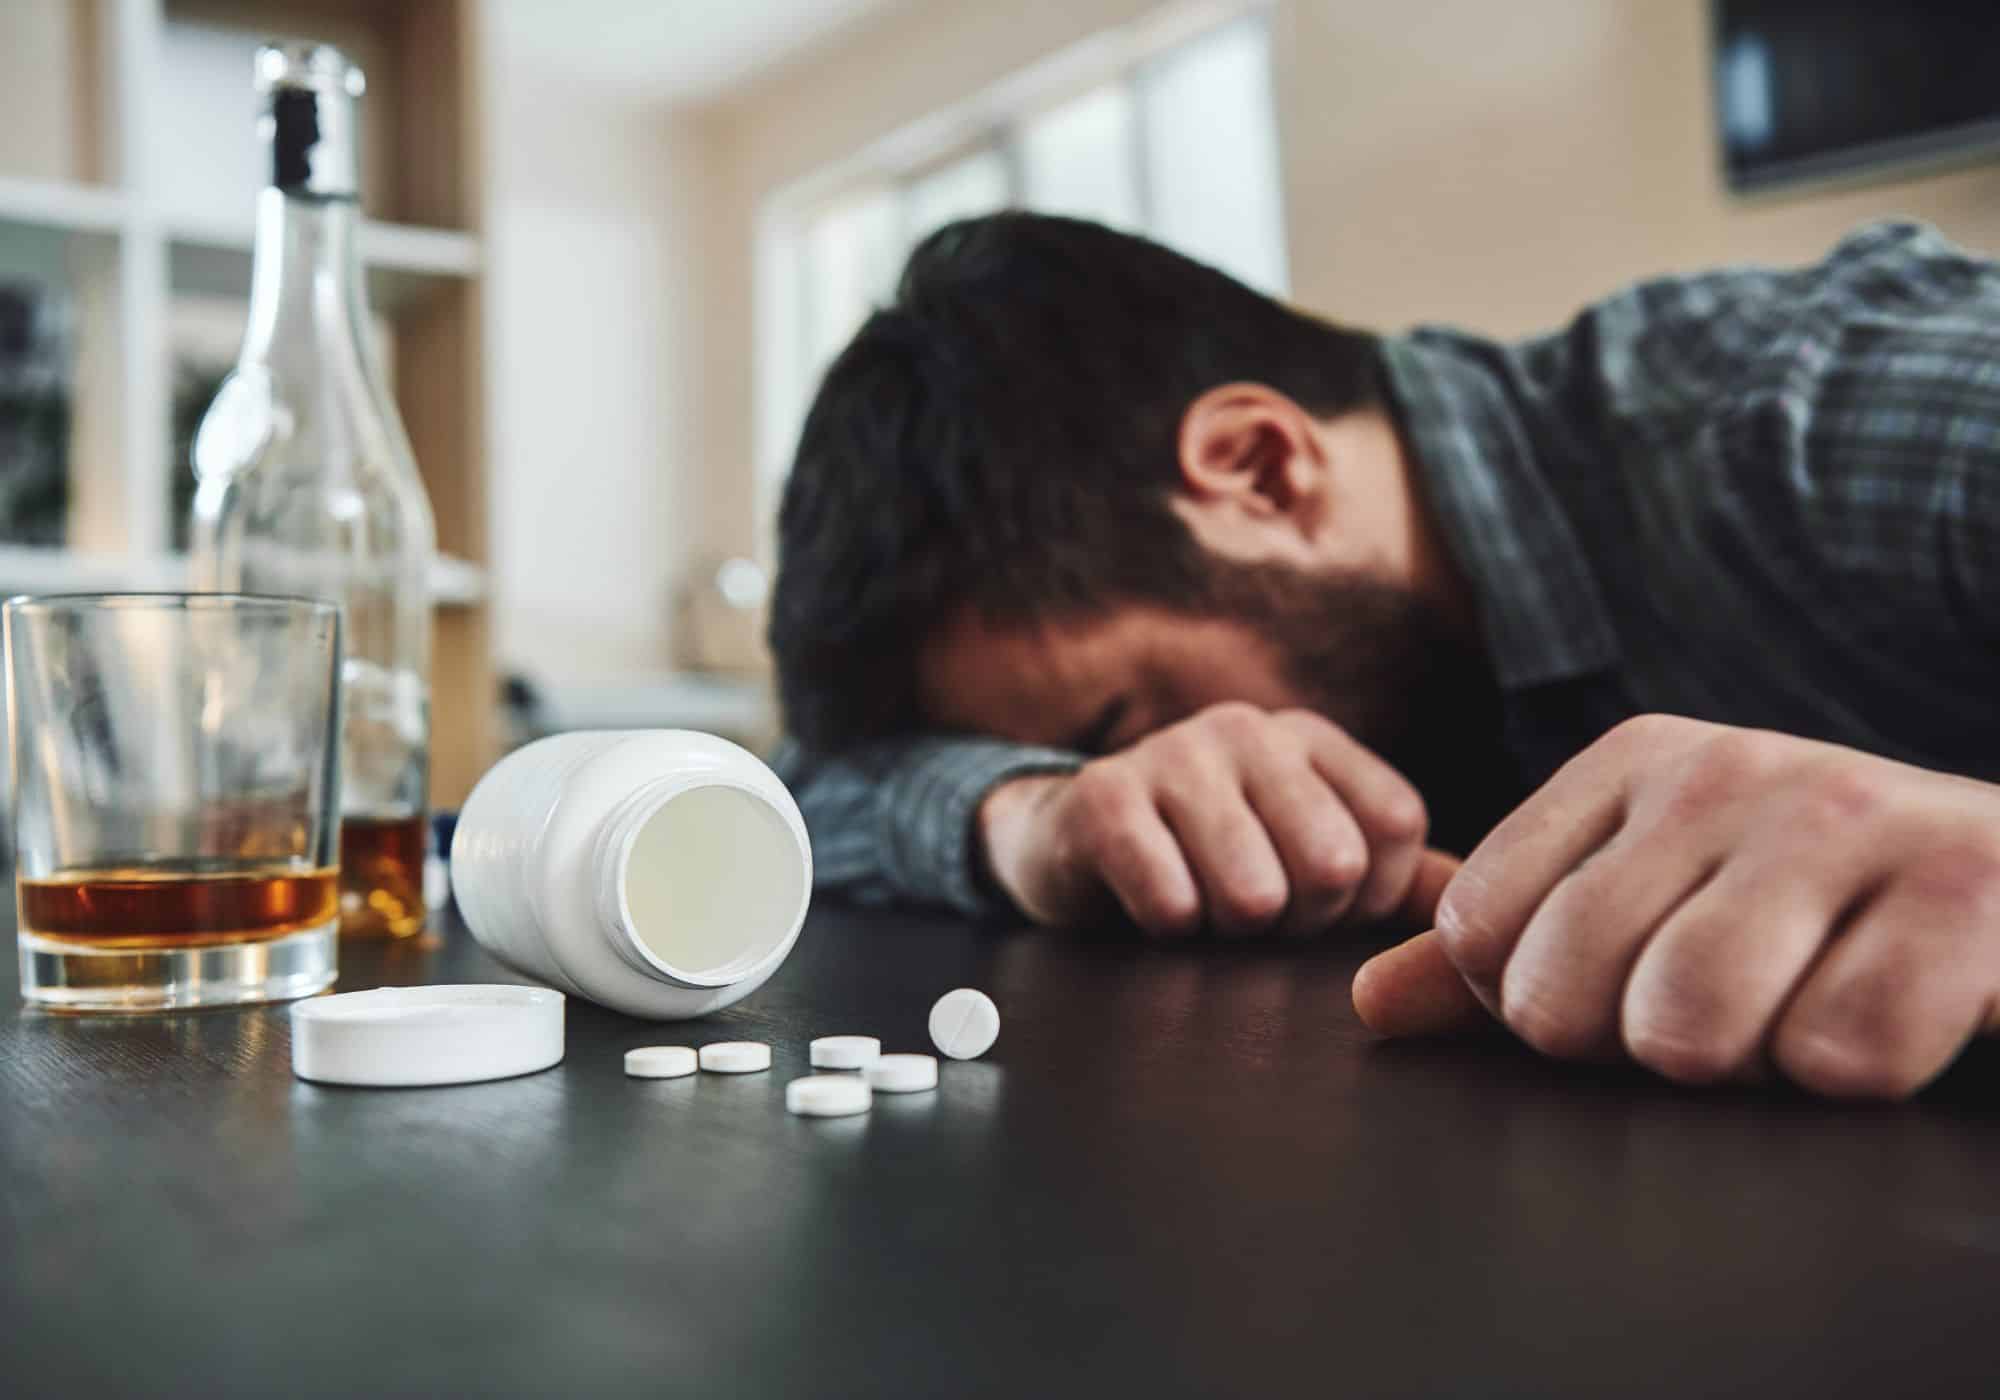 Dangers of Mixing Xanax and Other Drugs